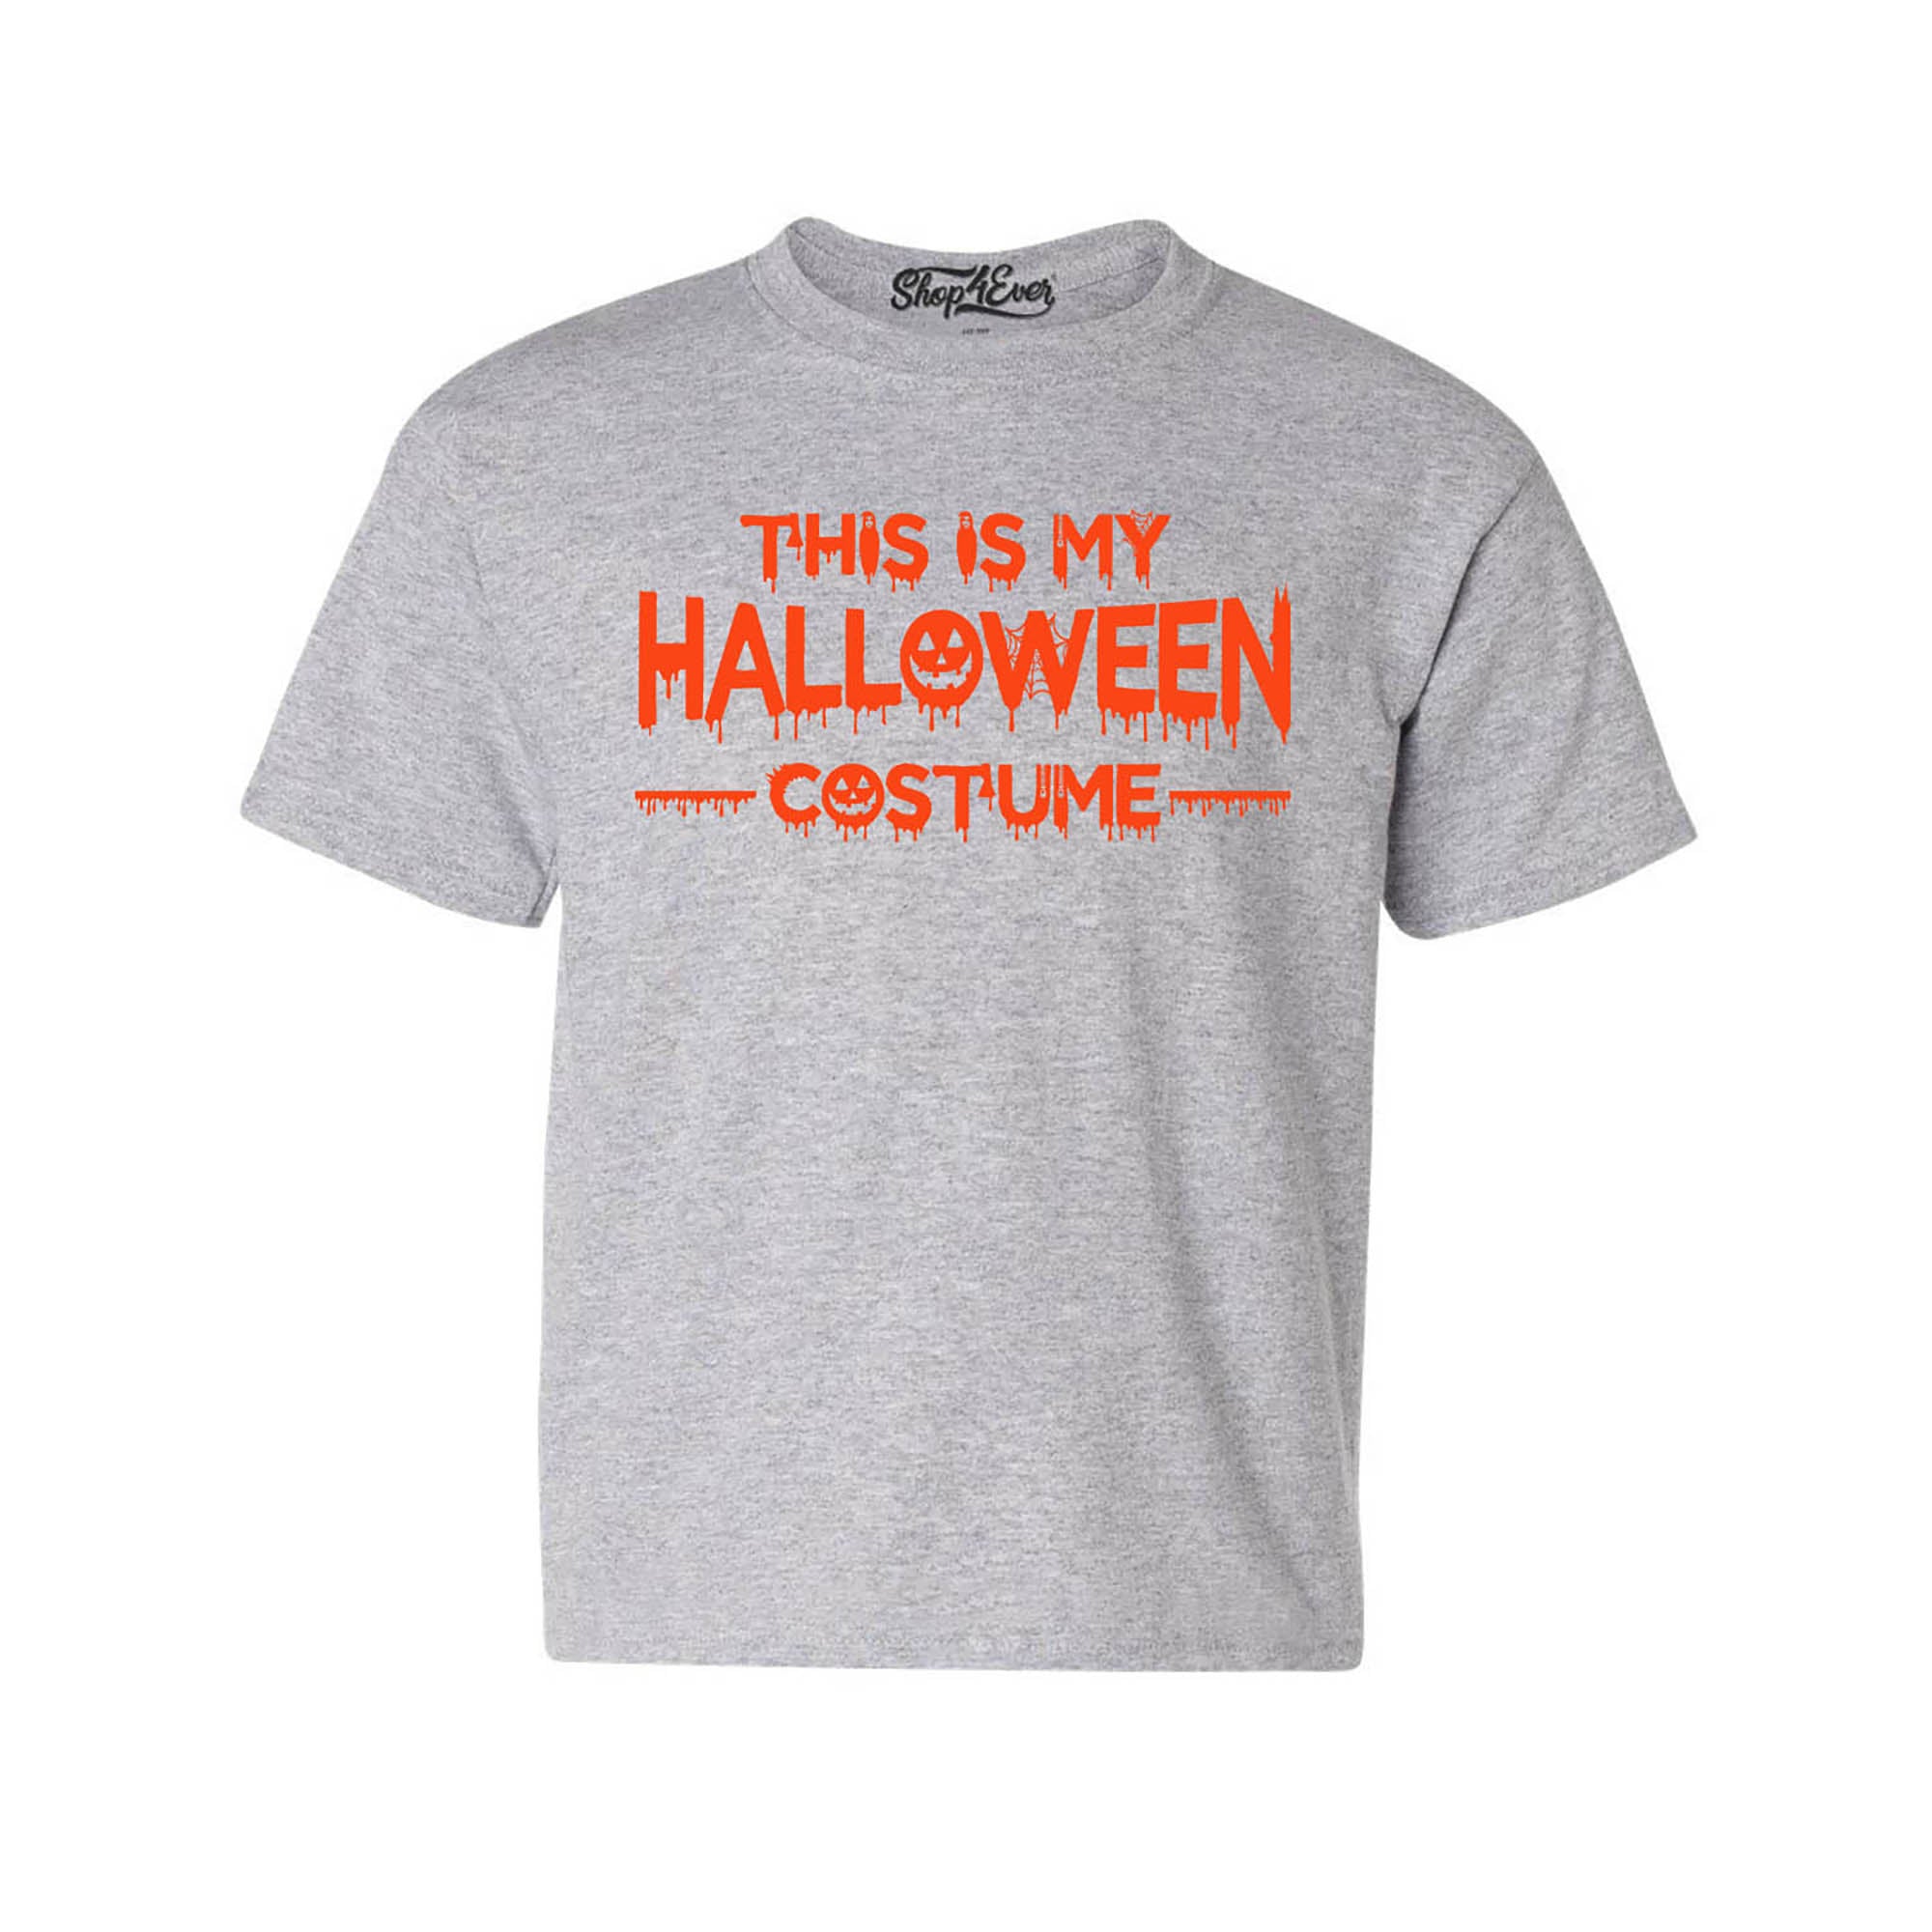 This is My Halloween Costume Youth's T-Shirt